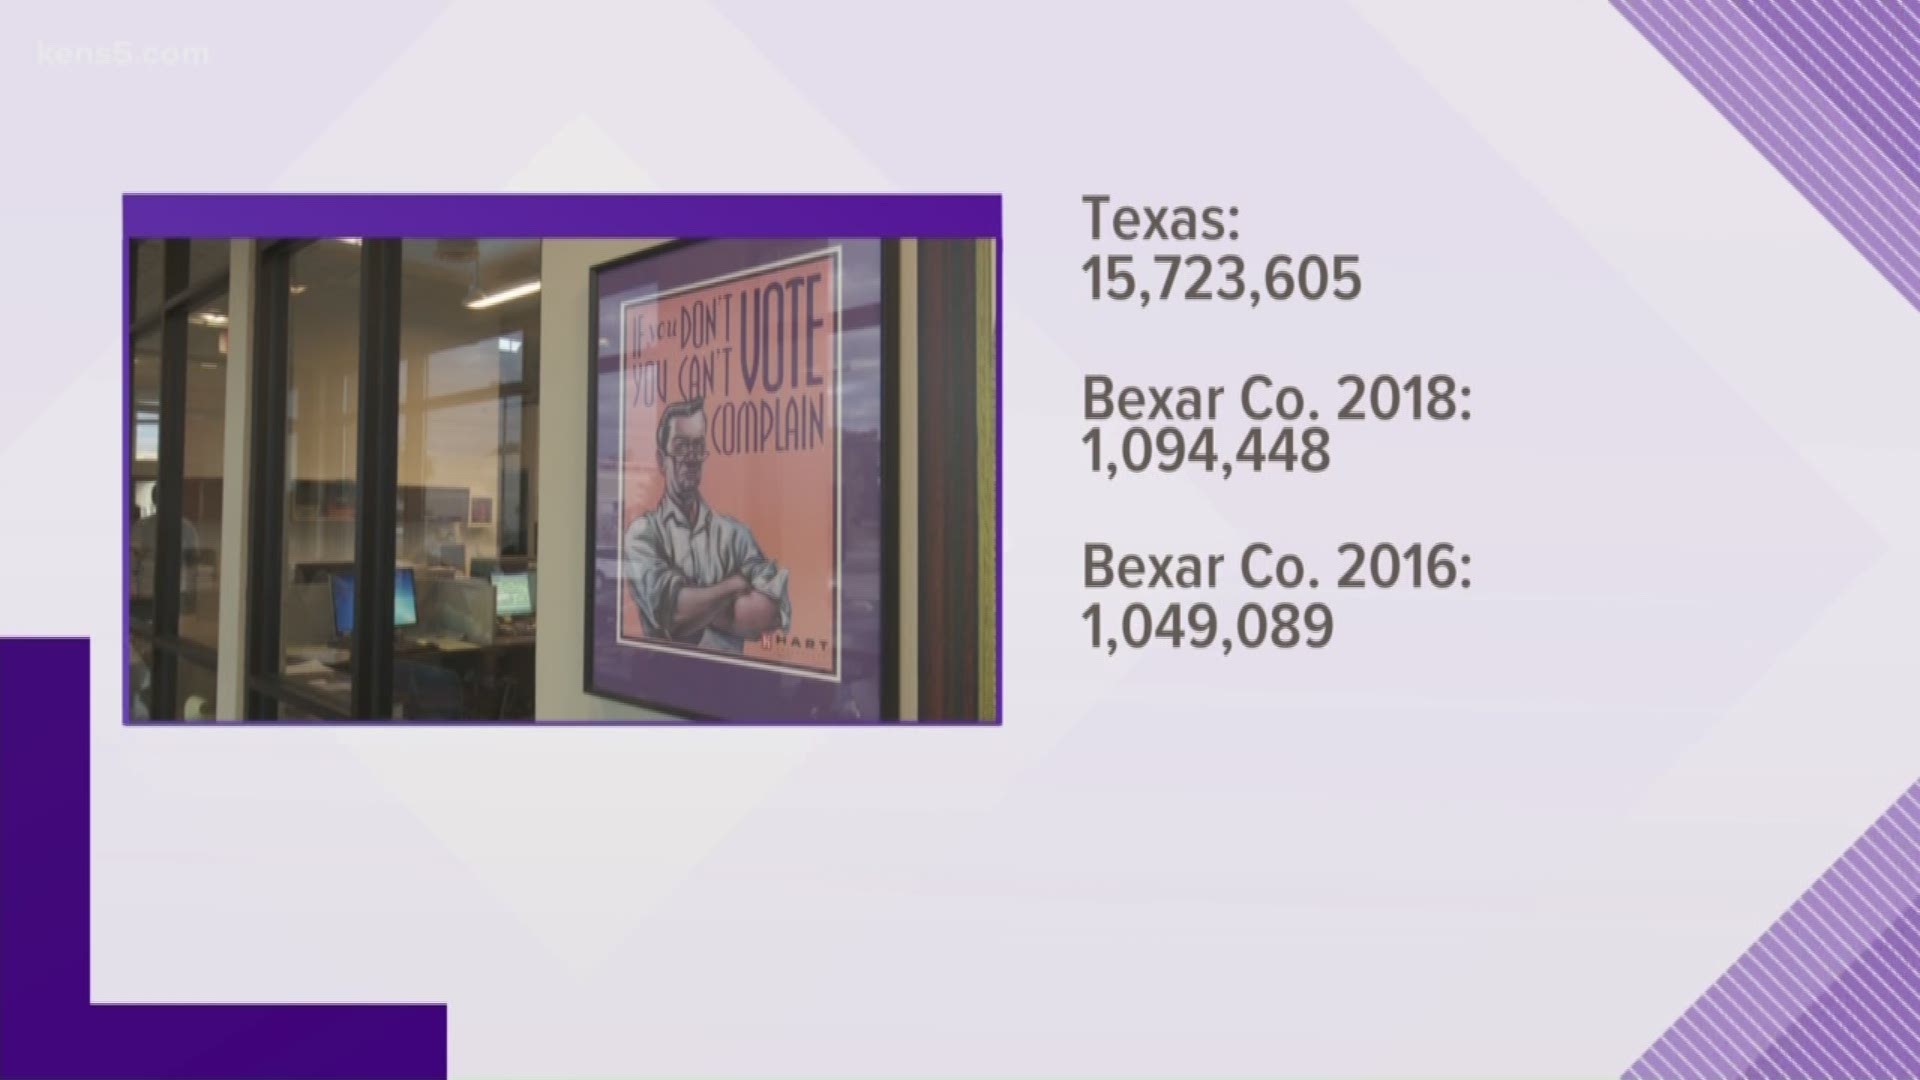 A record number of Texans have registered to vote ahead of this year's mid-term elections, including more than one million people in Bexar County alone.